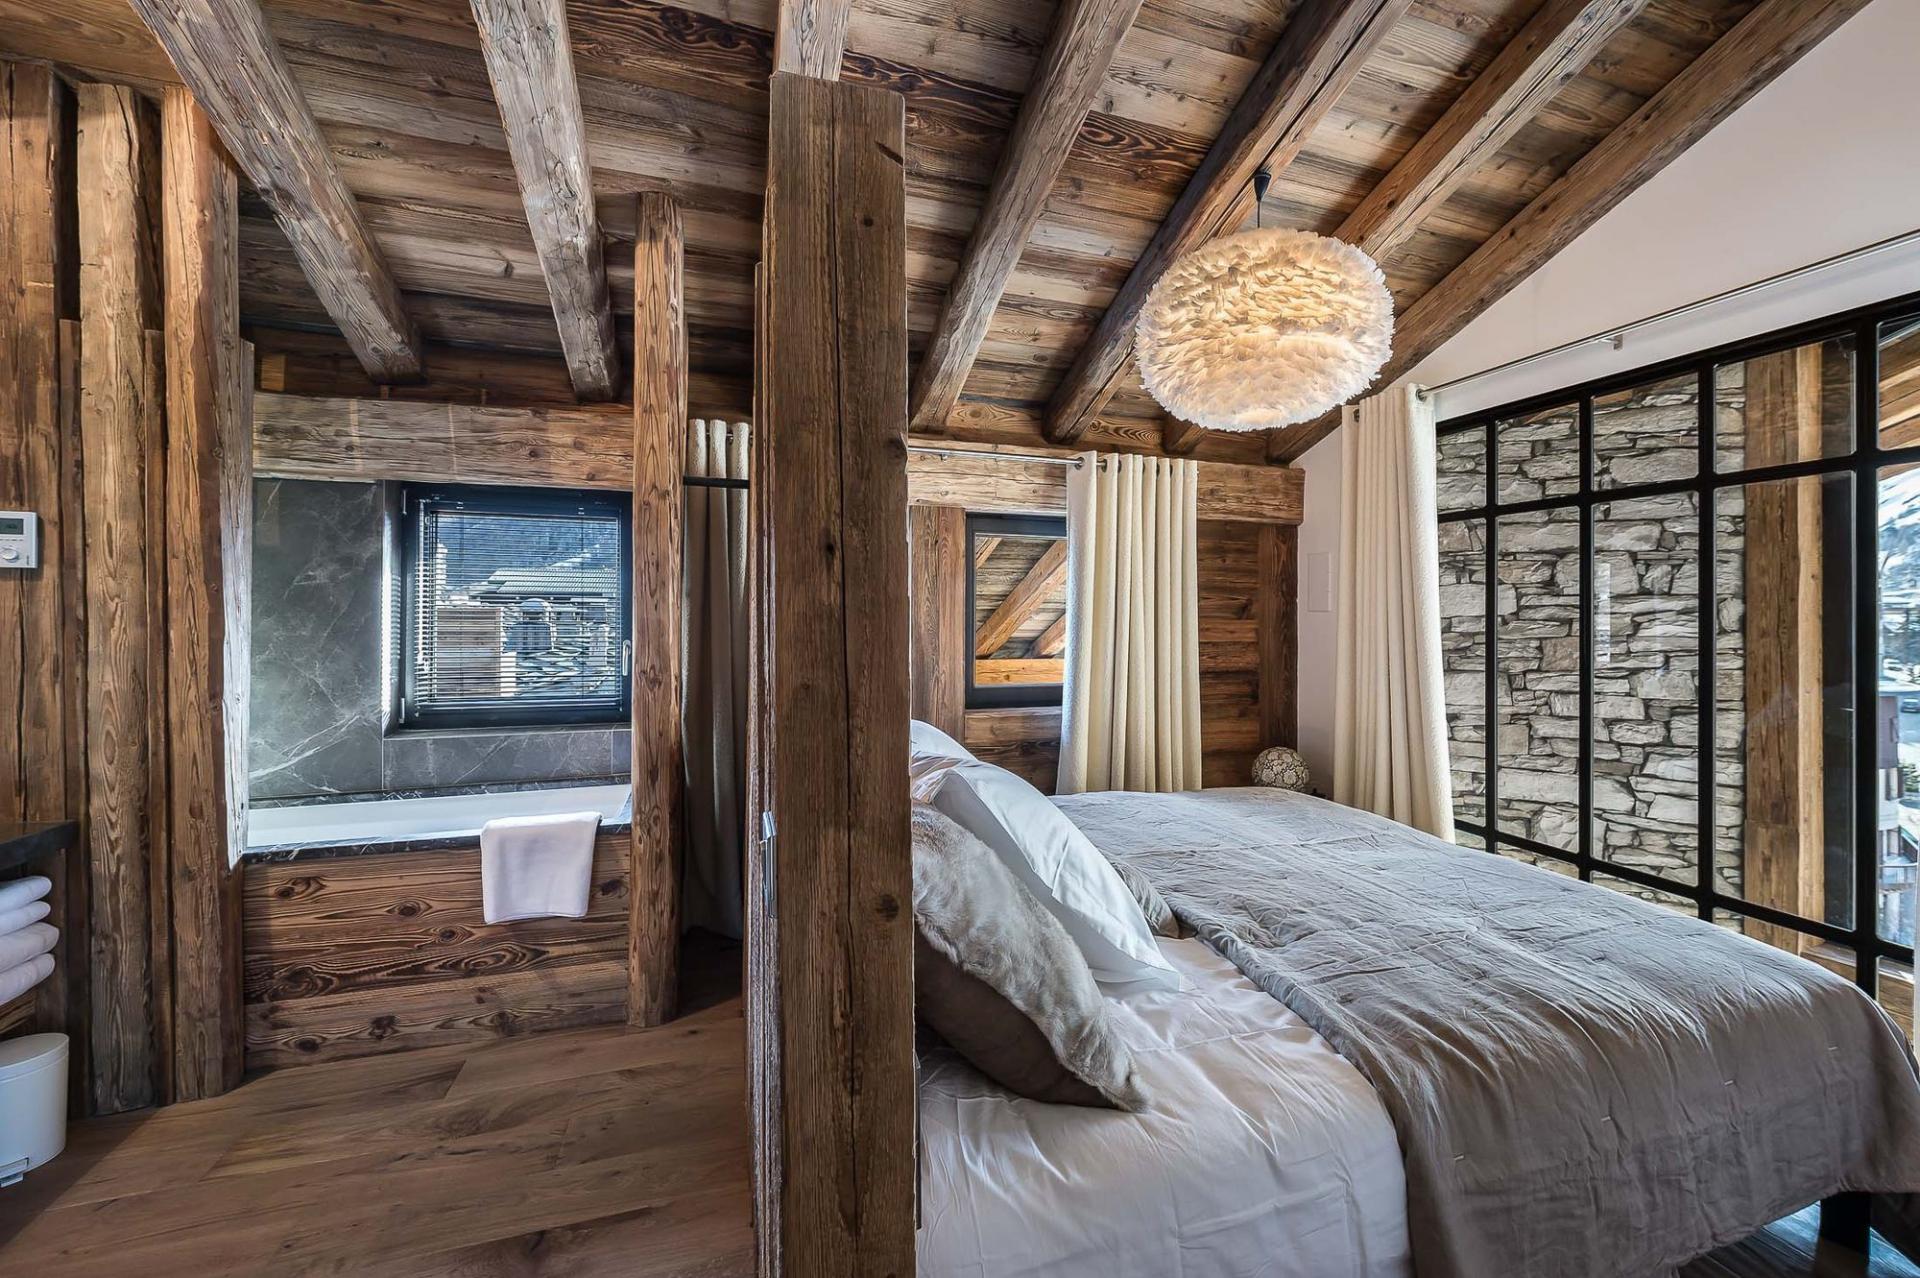 ONE OF THE BEDROOMS WITH VIEWS ON THE MOUNTAINS